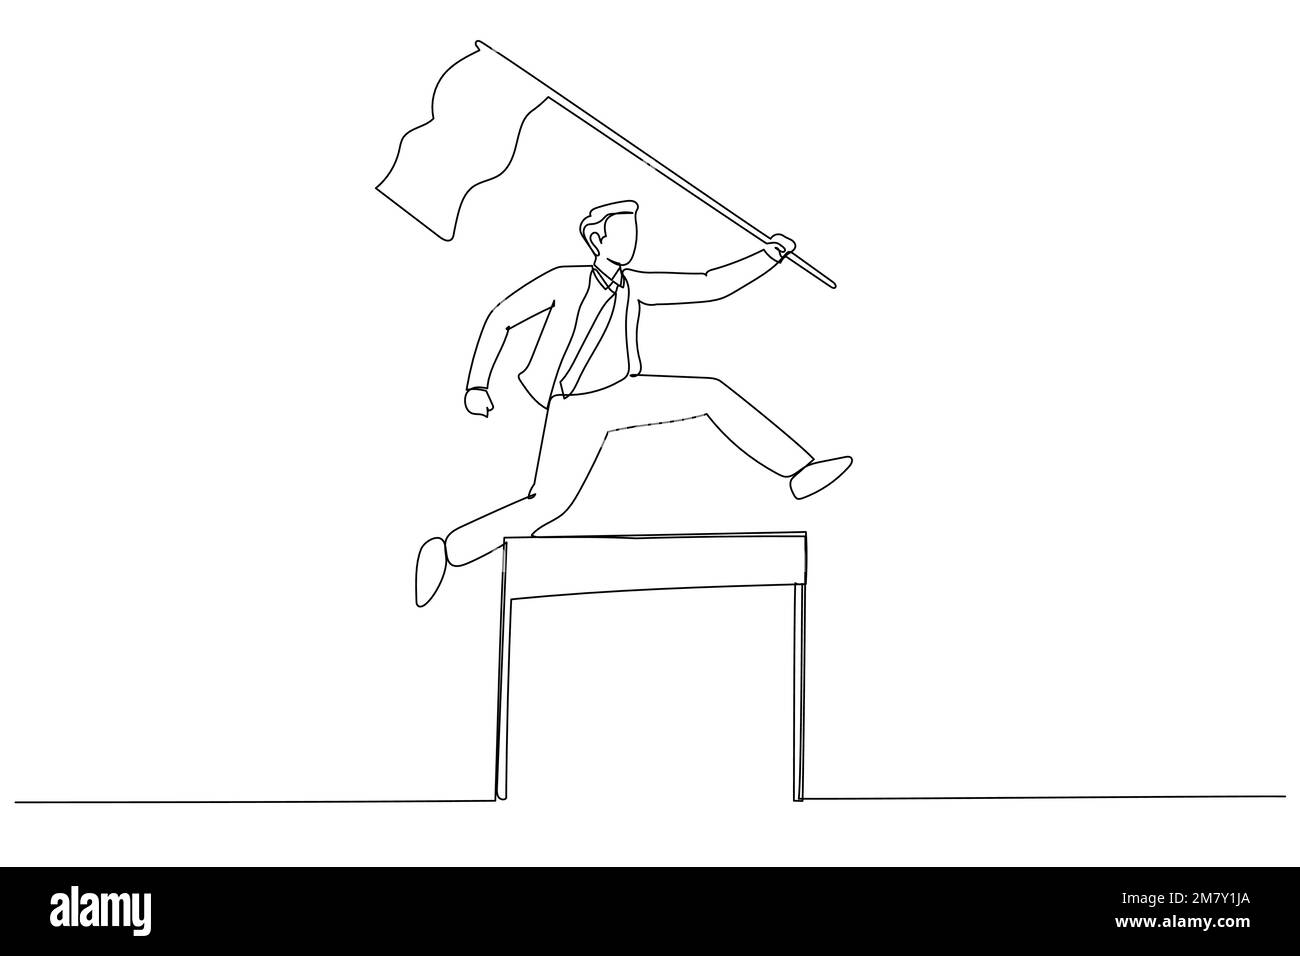 Illustration of businessman competing in race holding a leader flag jumping over obstacle concept of determination. Single line art style design Stock Vector